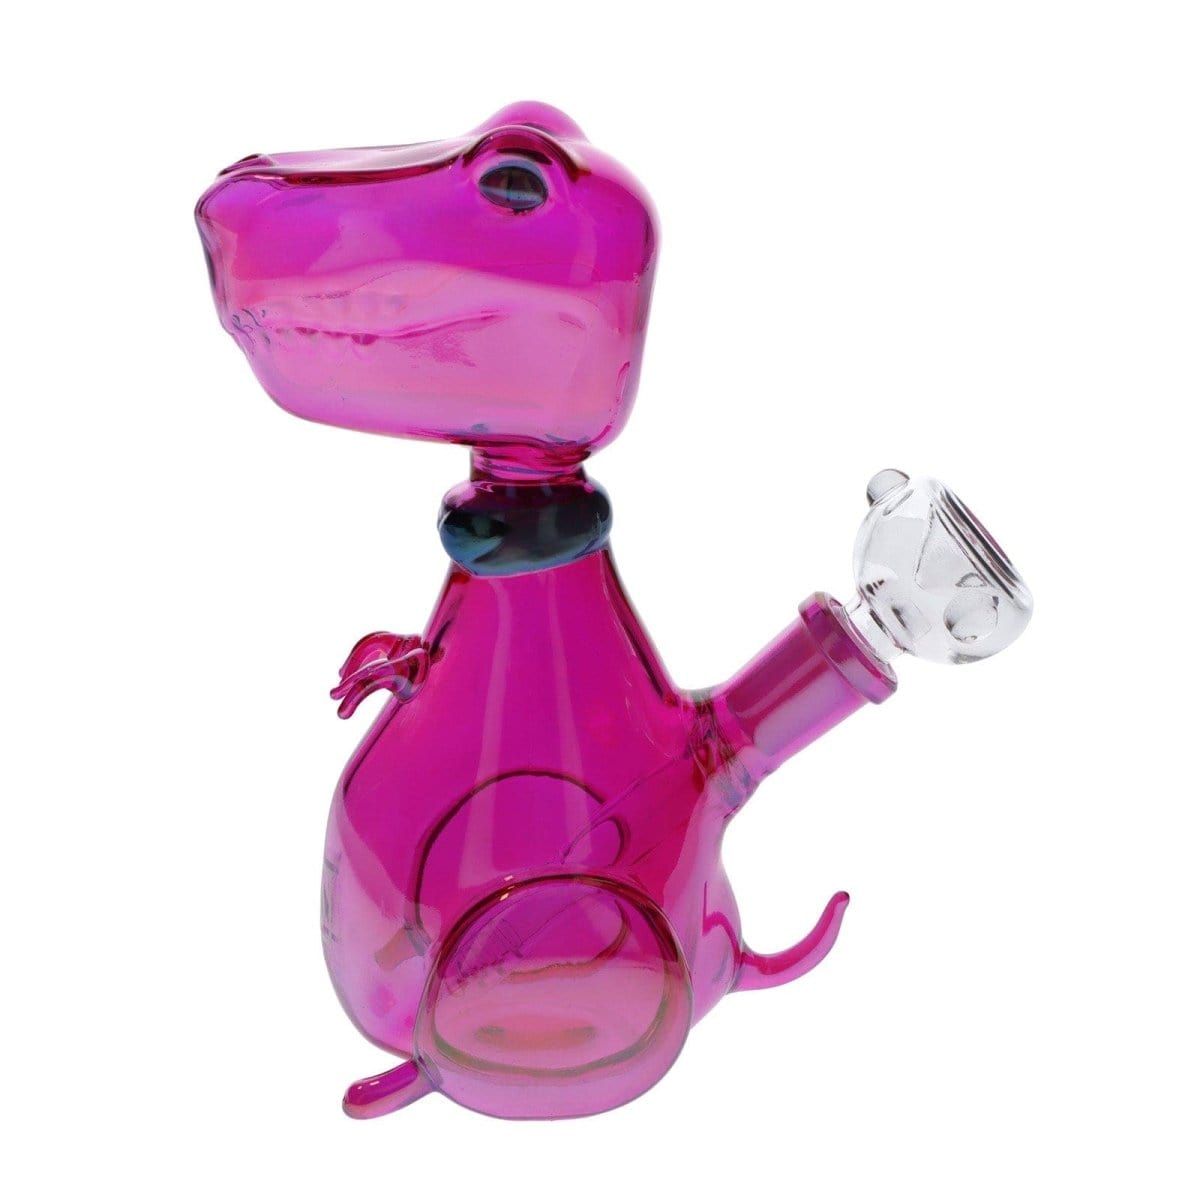 Daily High Club subscription box August 2023 "Rave Dino" Smoking Subscription Box 000-AUGSUB-RAVEDINO-2023